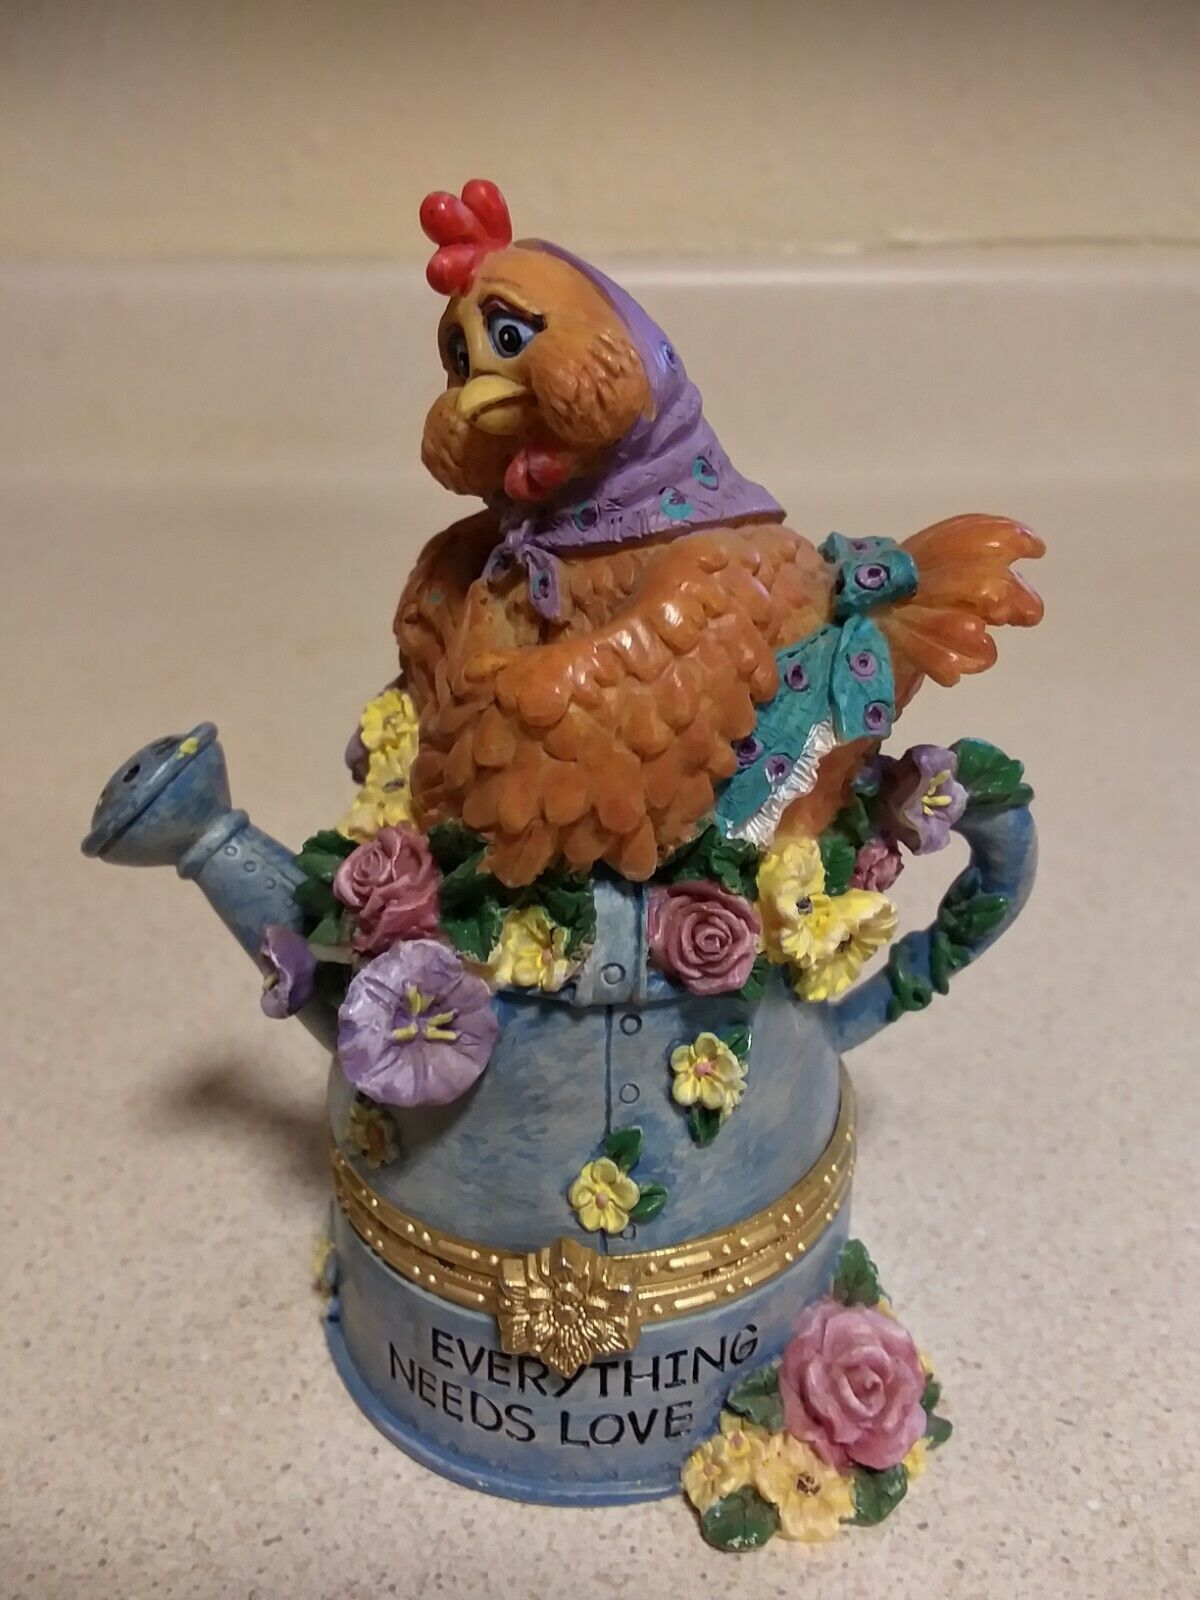 🐔1999 Chicken Soup For The Soul #30701 Figurine🐔